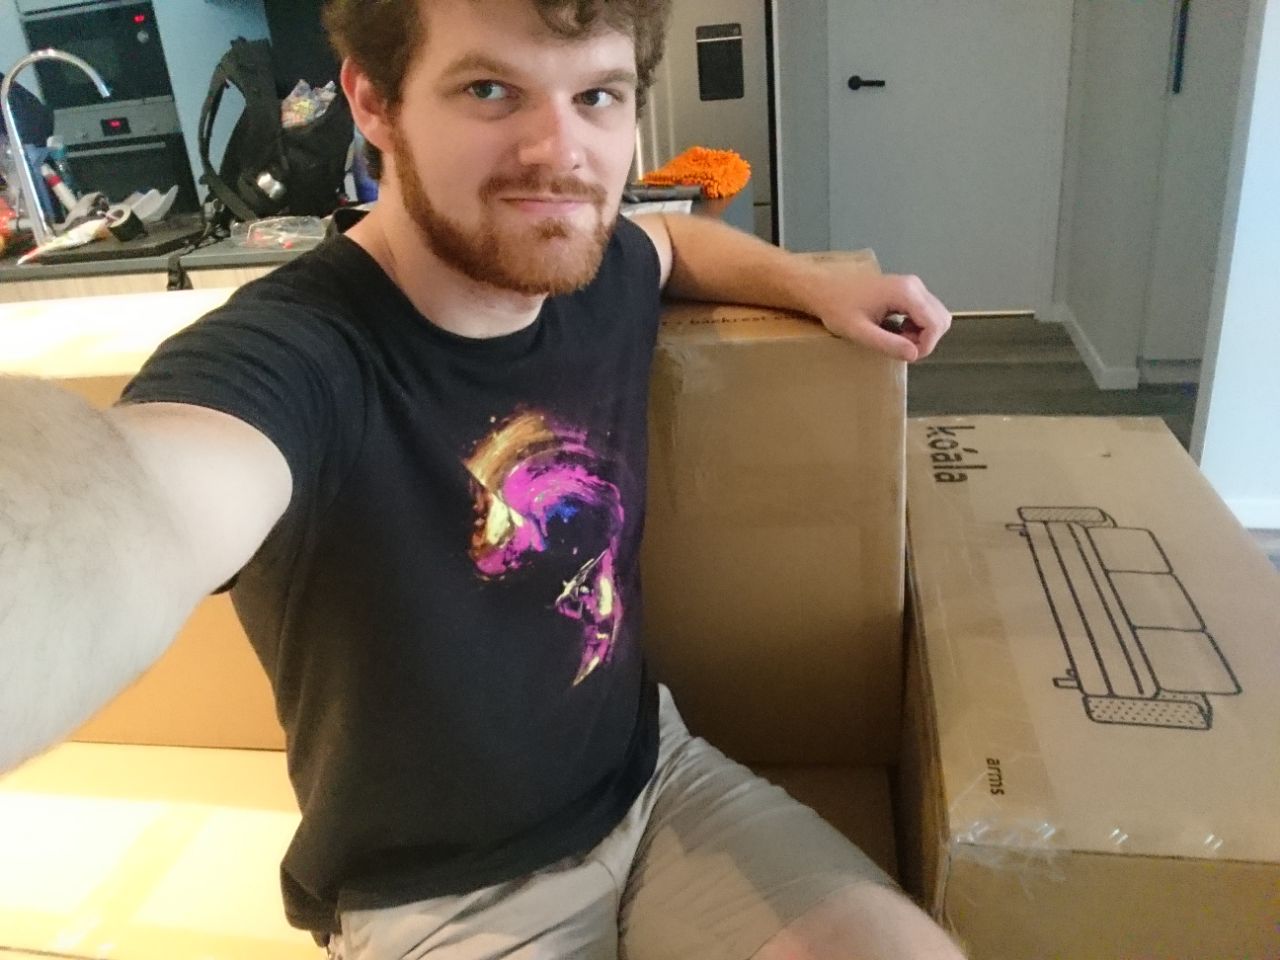 sitting on my delivered couch boxes as if they are a couch